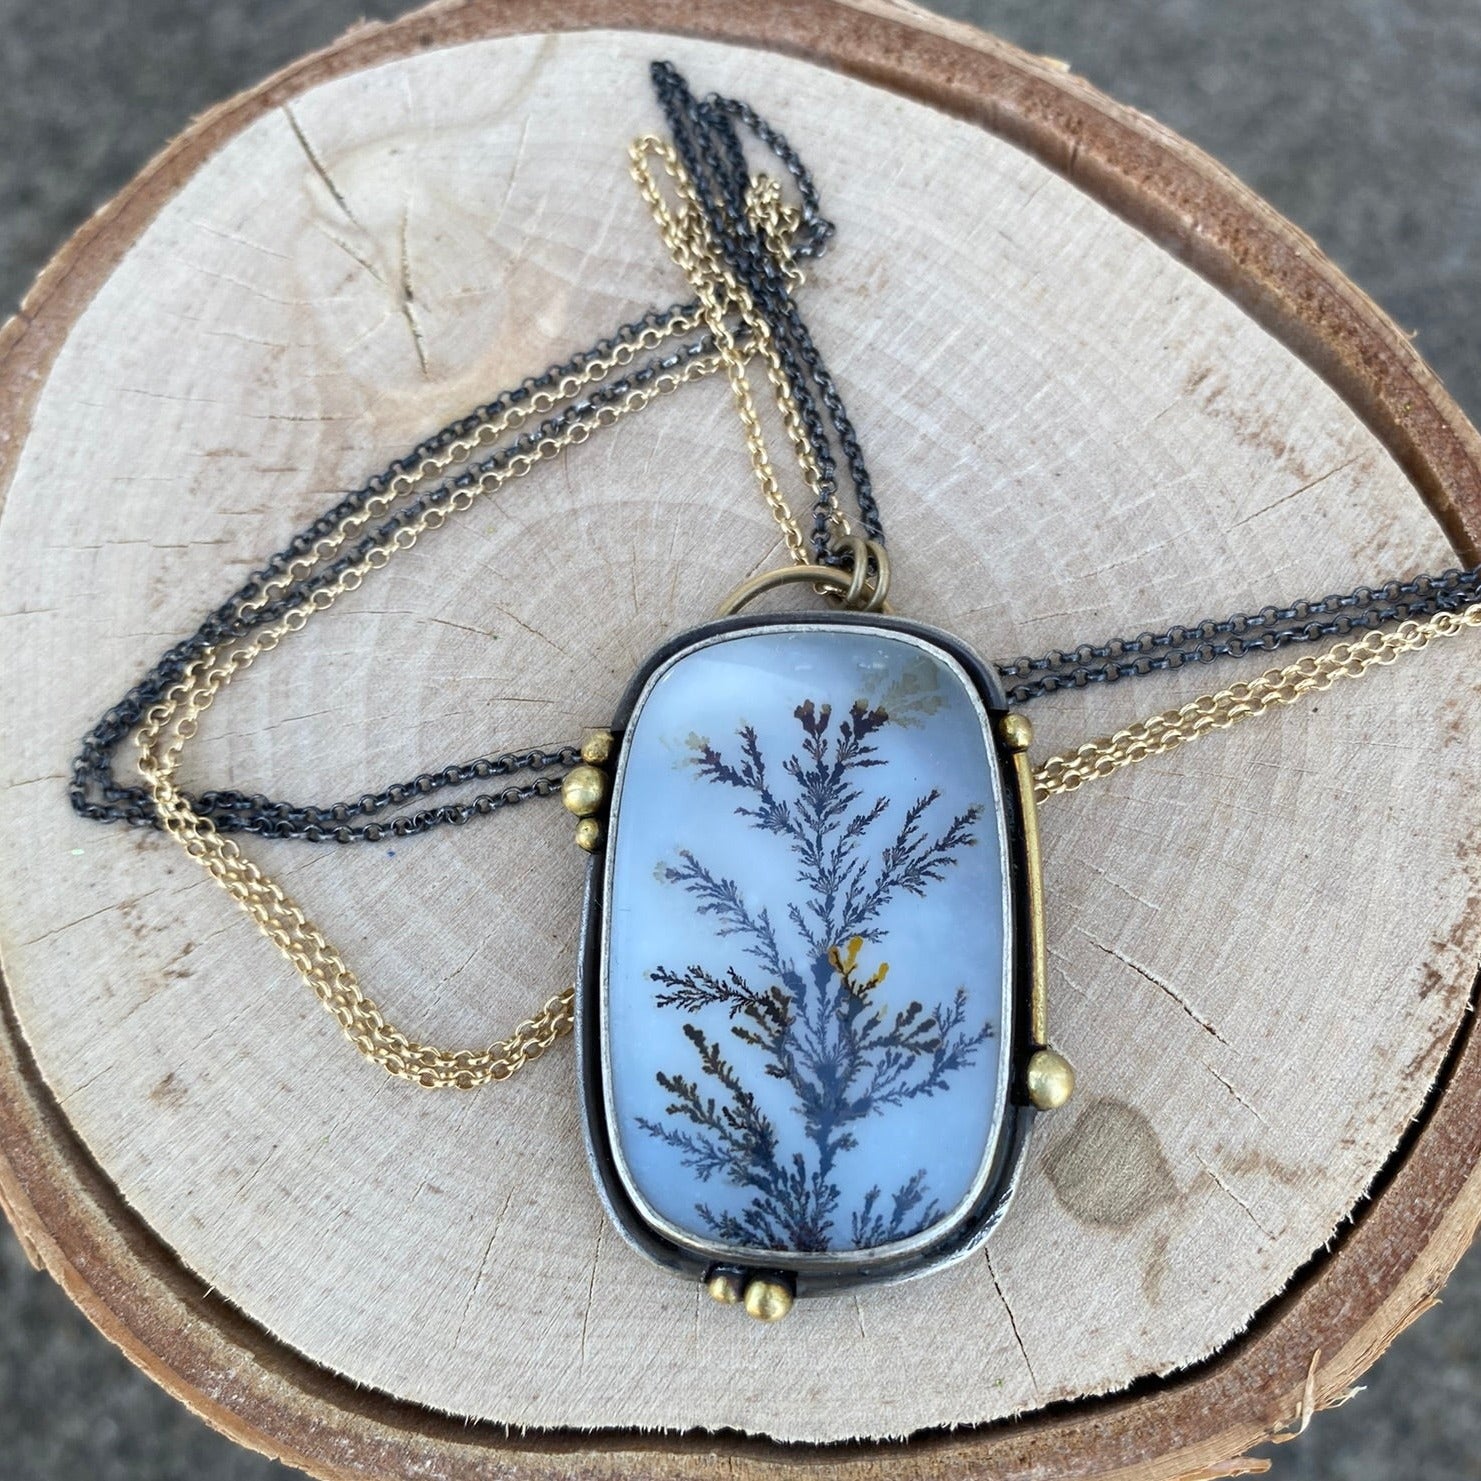 Mixed Metal Dendritic Agate Pendant Necklace